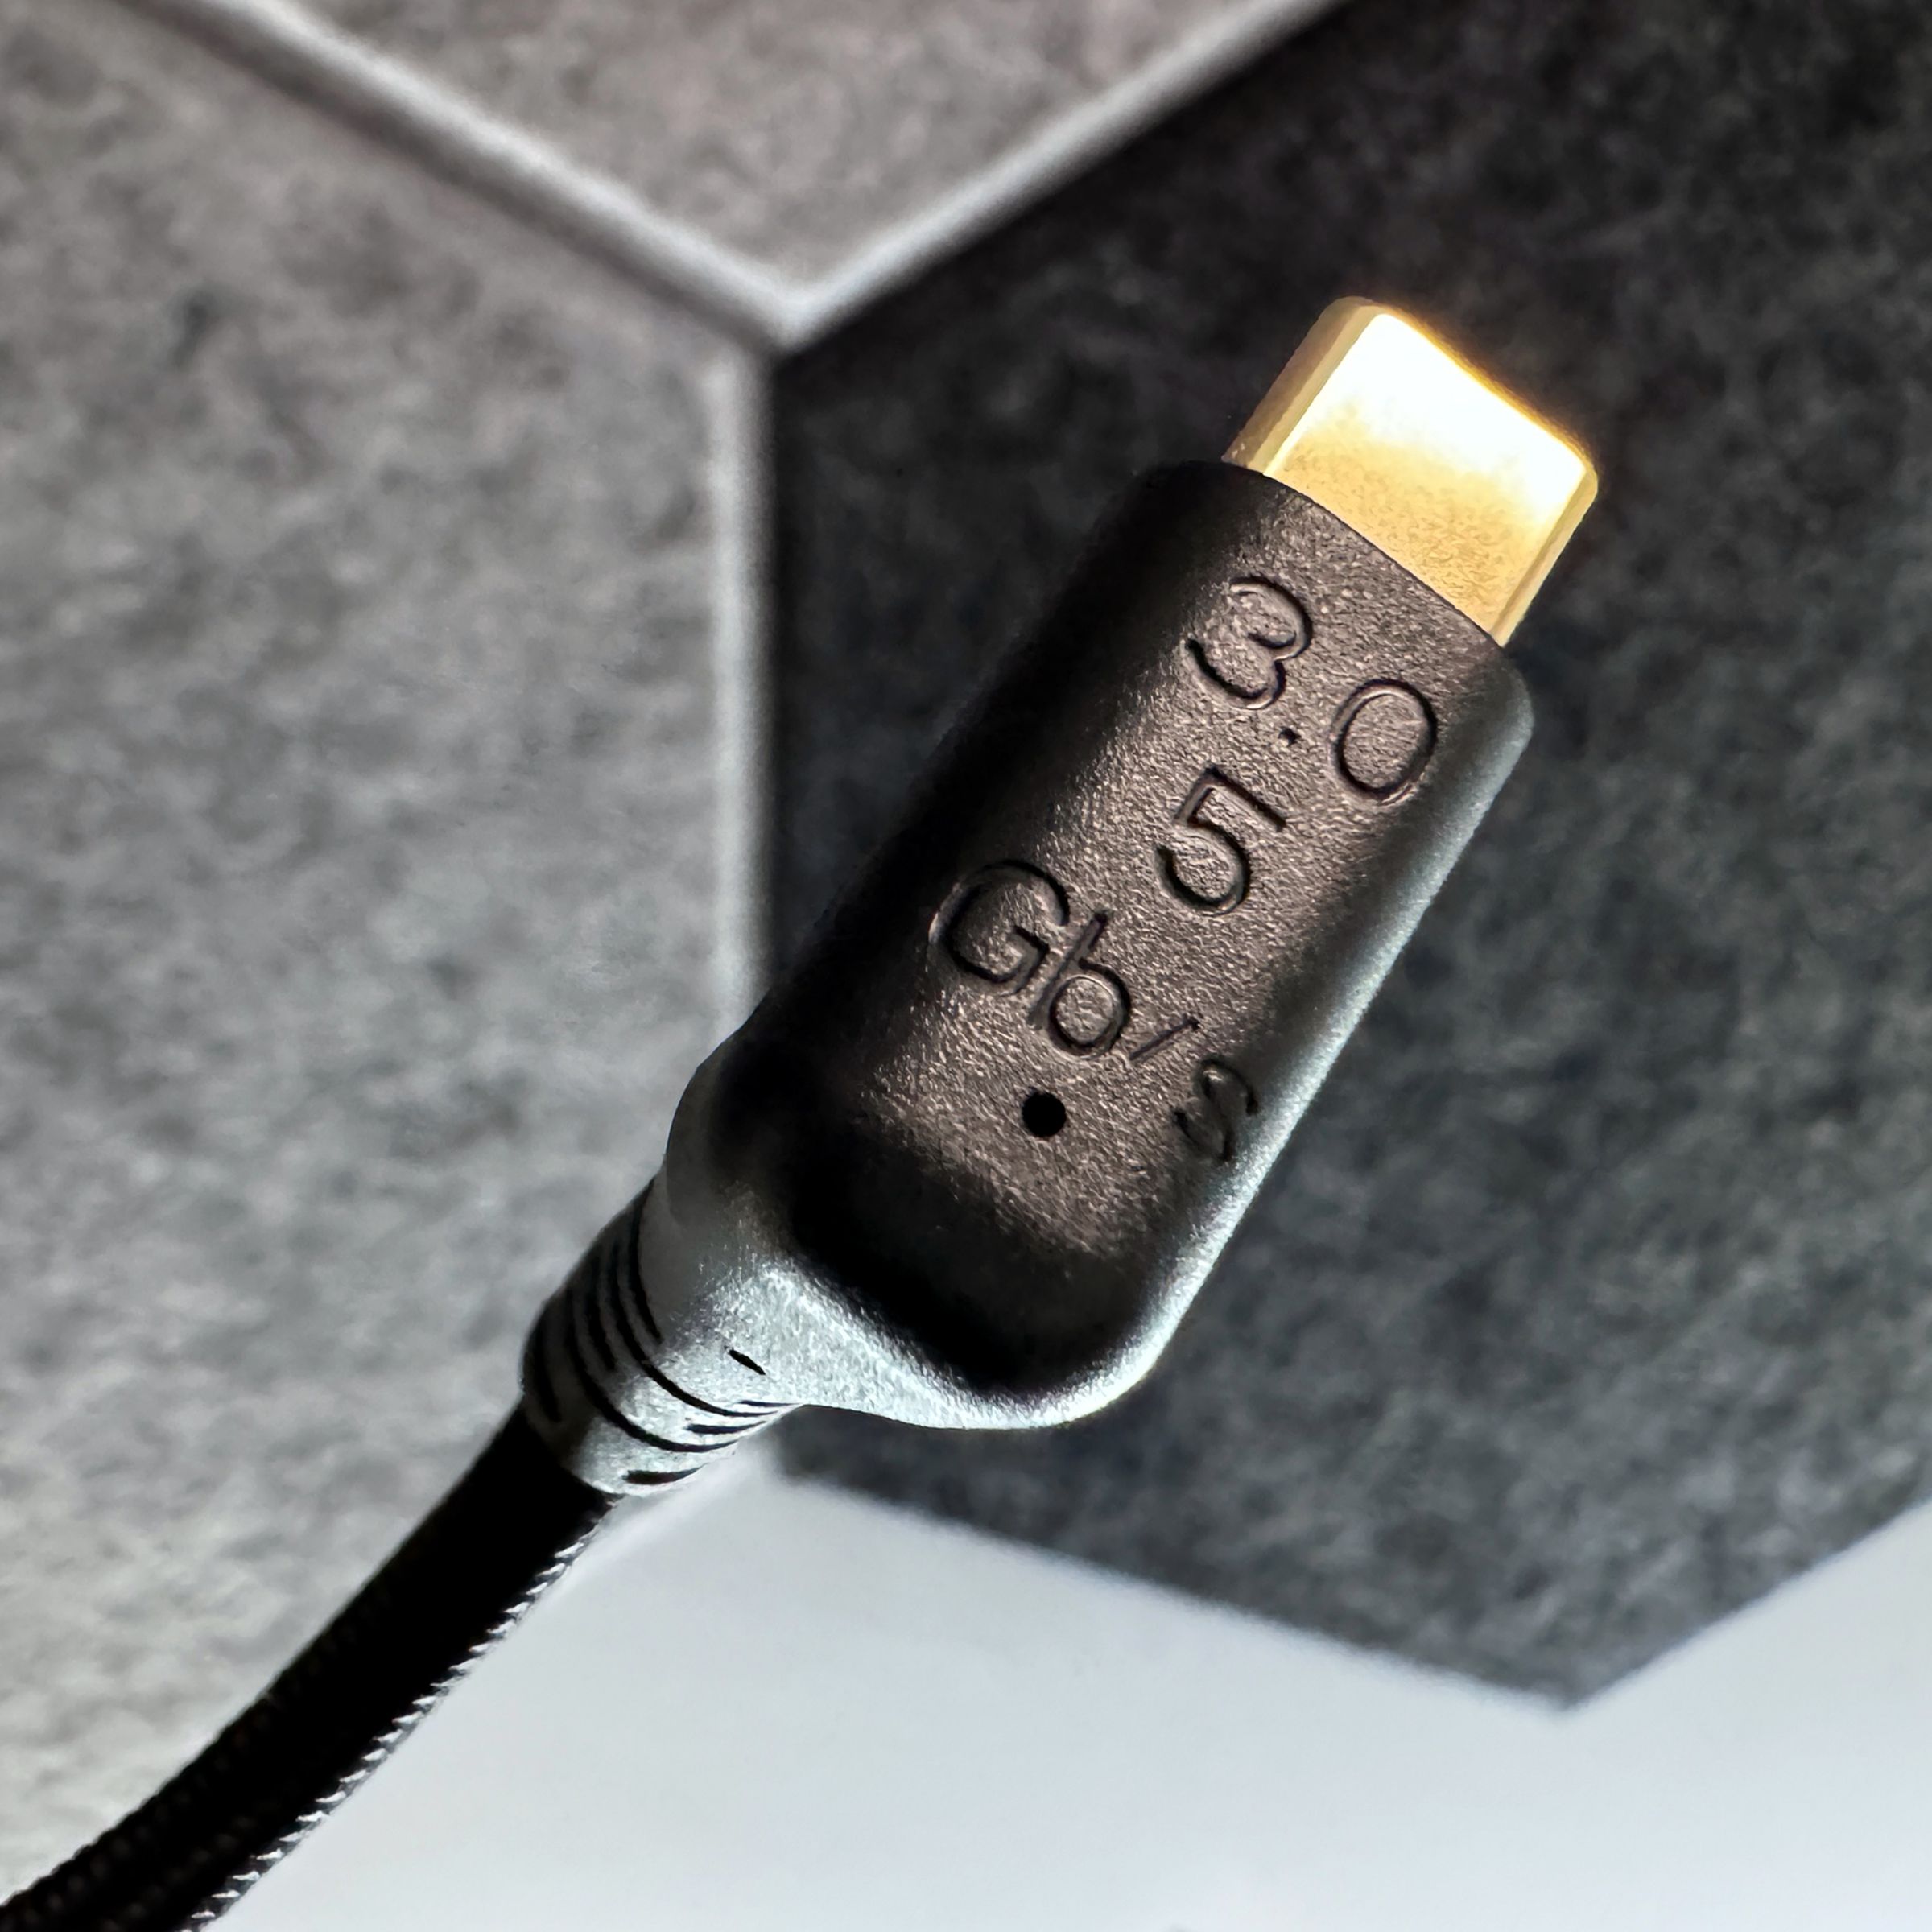 Elgato’s USB-C cable with bandwidth information.